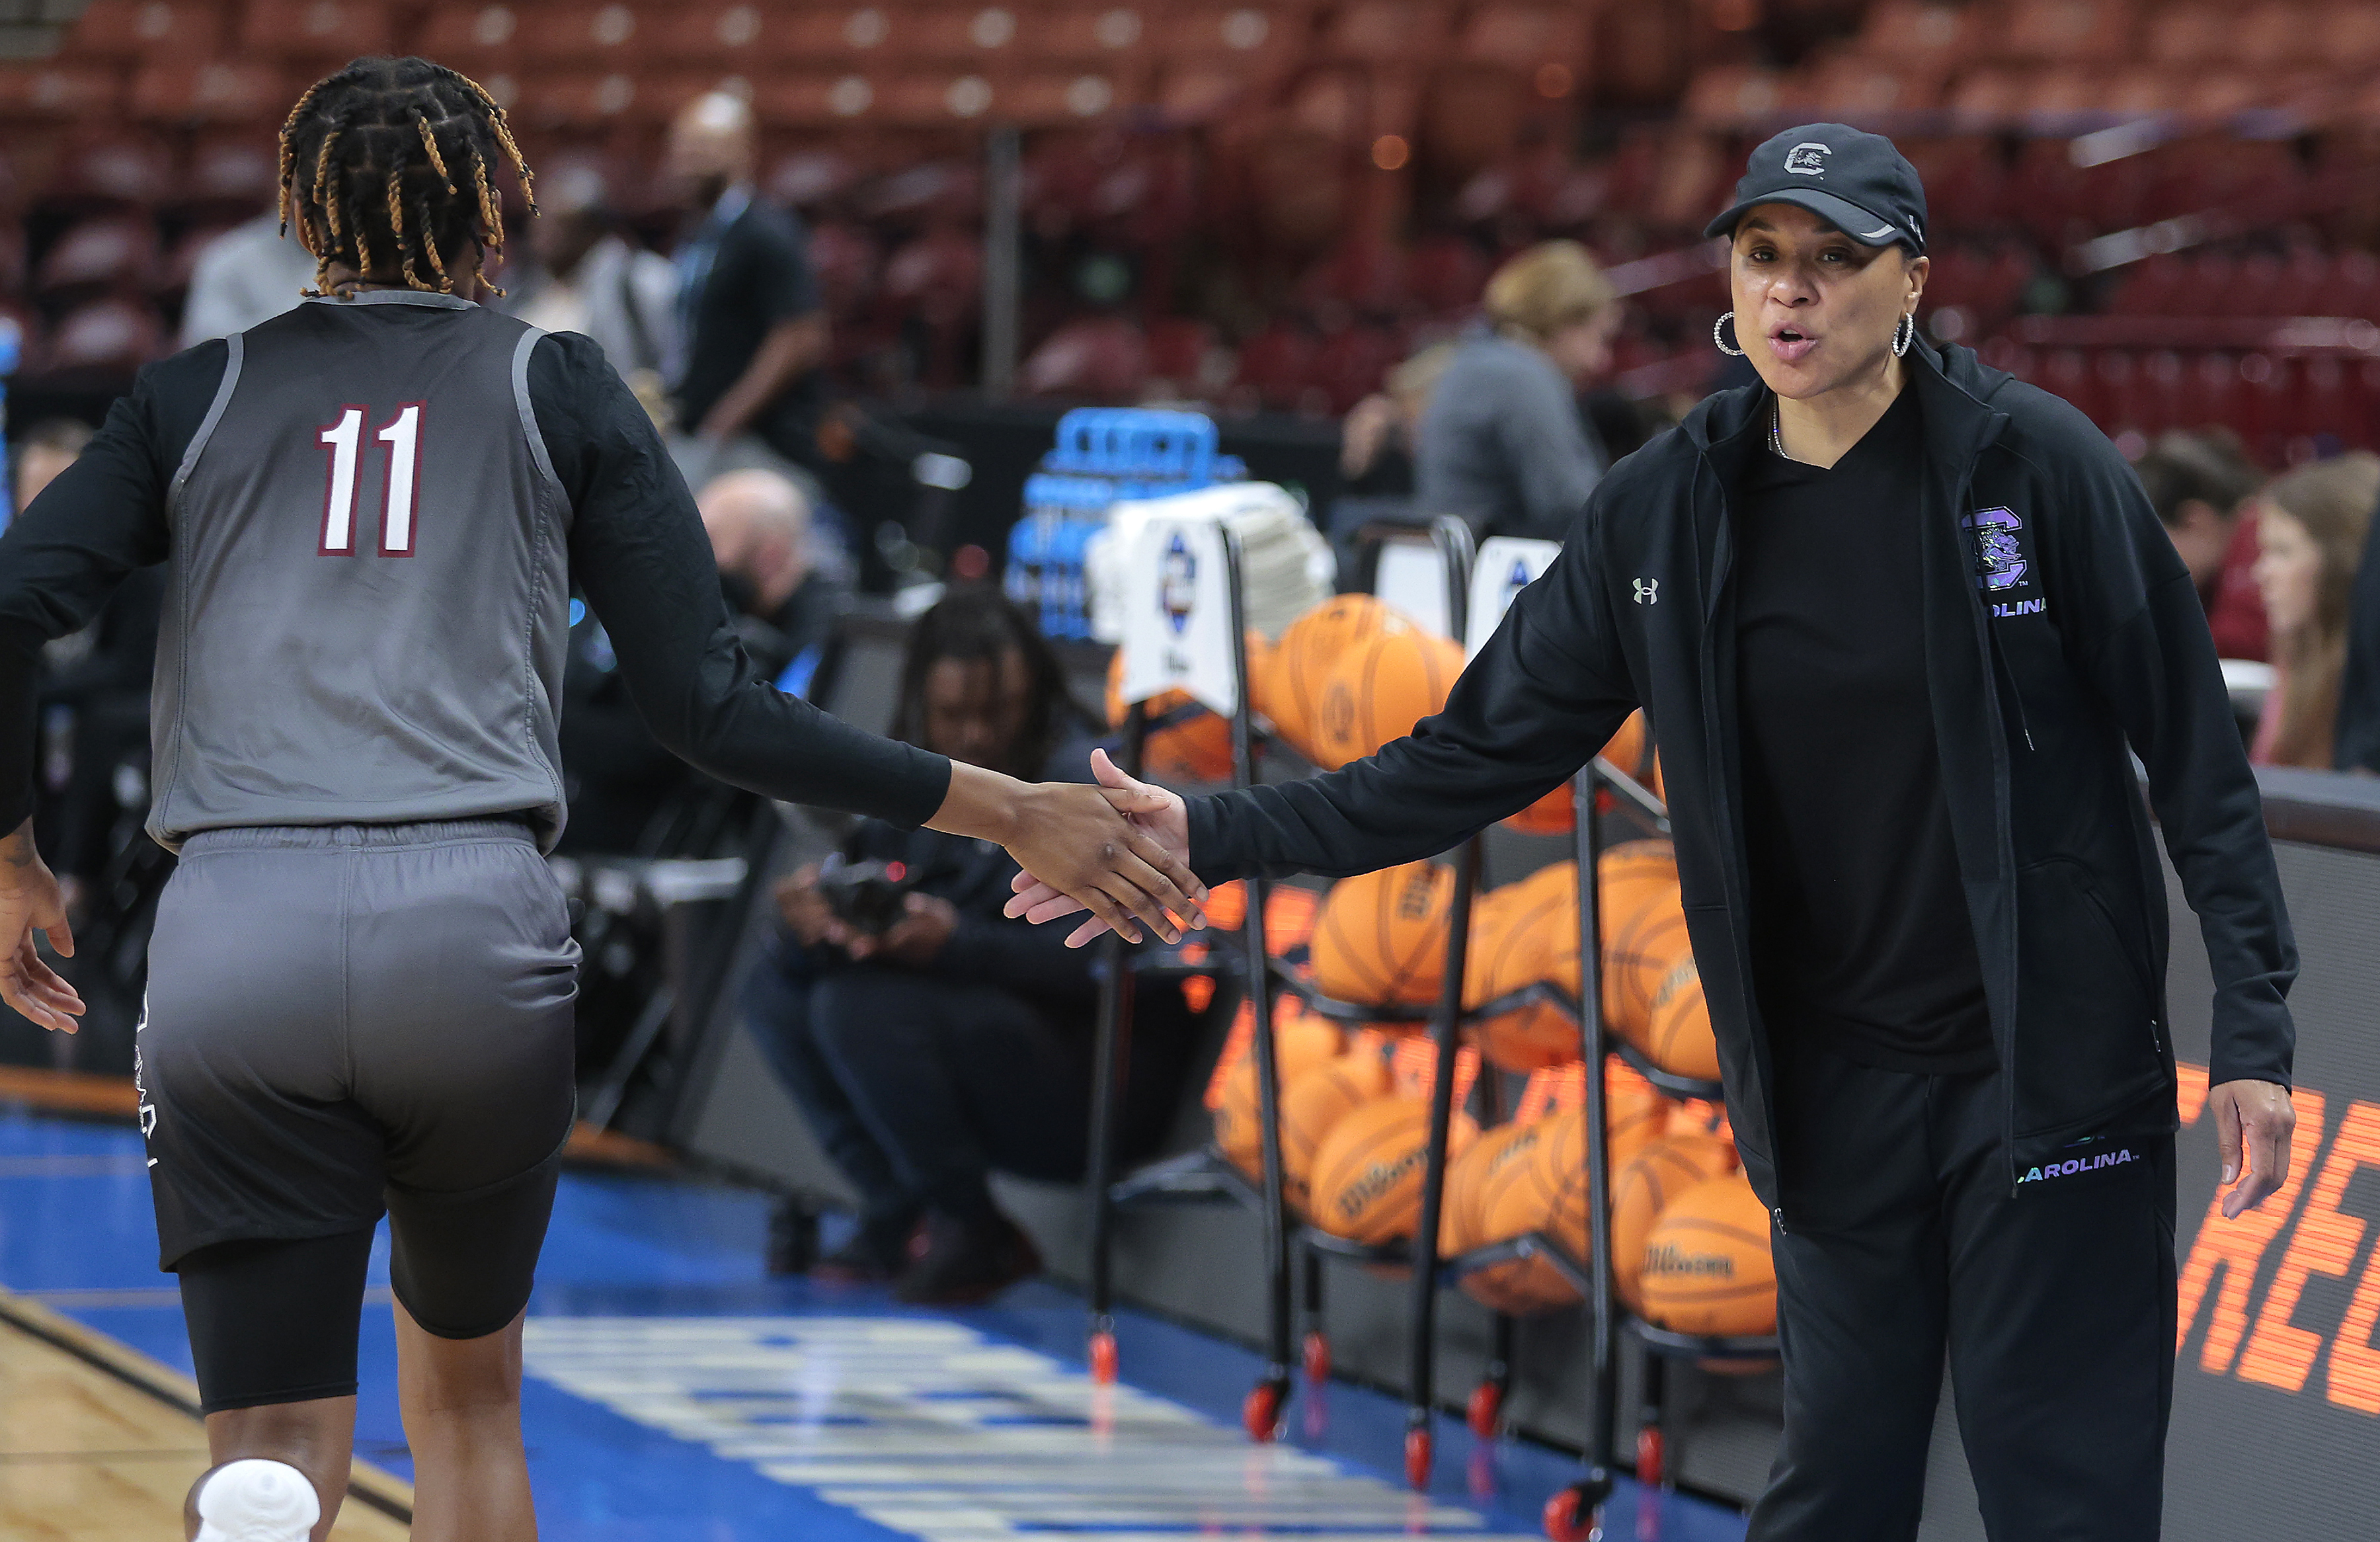 Andscape - Dawn Staley honored her mentor, late Temple University head  coach John Chaney, during South Carolina Women's Basketball's game against  UConn last night 🙏🏽